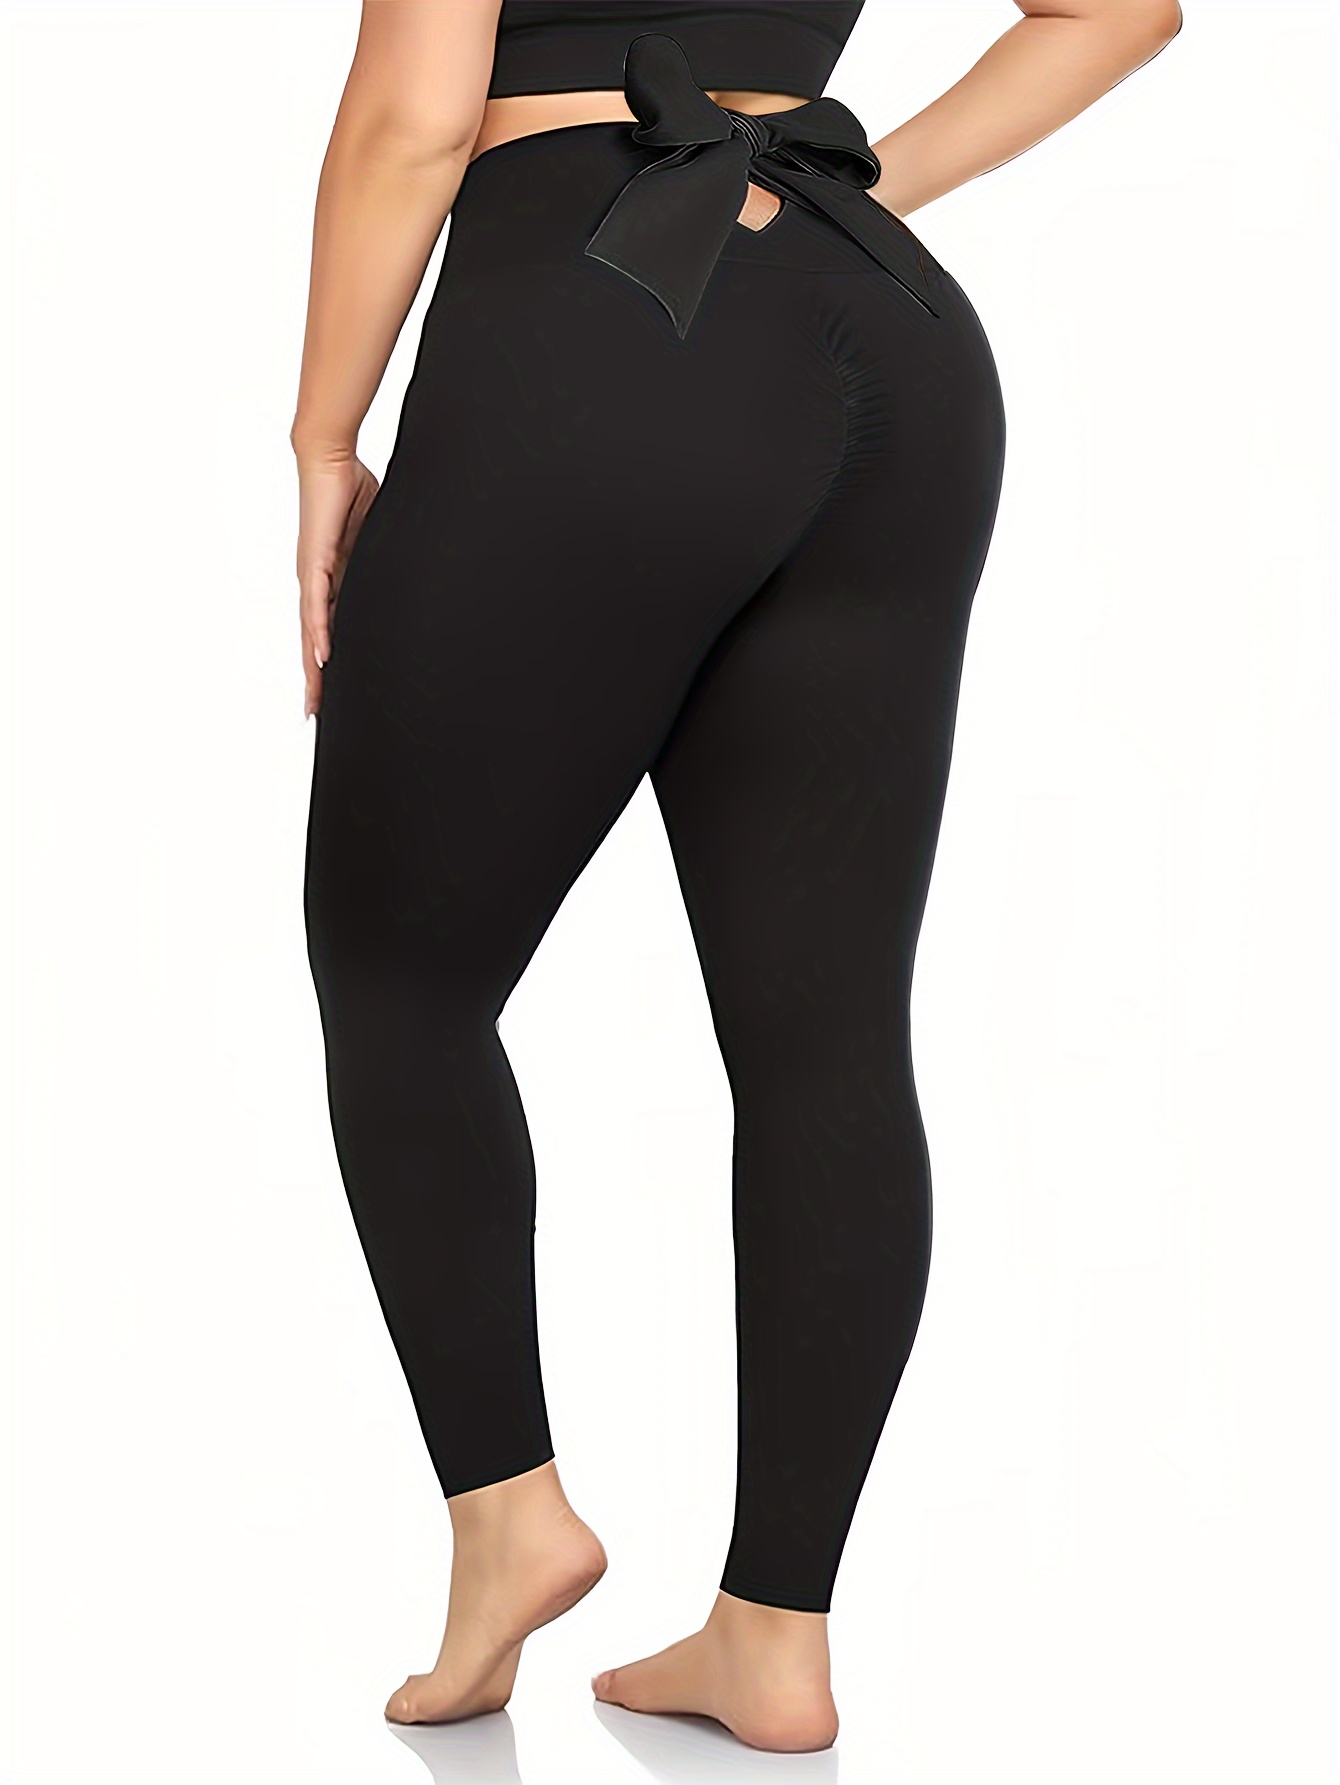 COMVALUE Workout Leggings for Women Plus Size,Womens Butt Lifting Leggings  Seamless High Waisted Yoga Pants Black at  Women's Clothing store